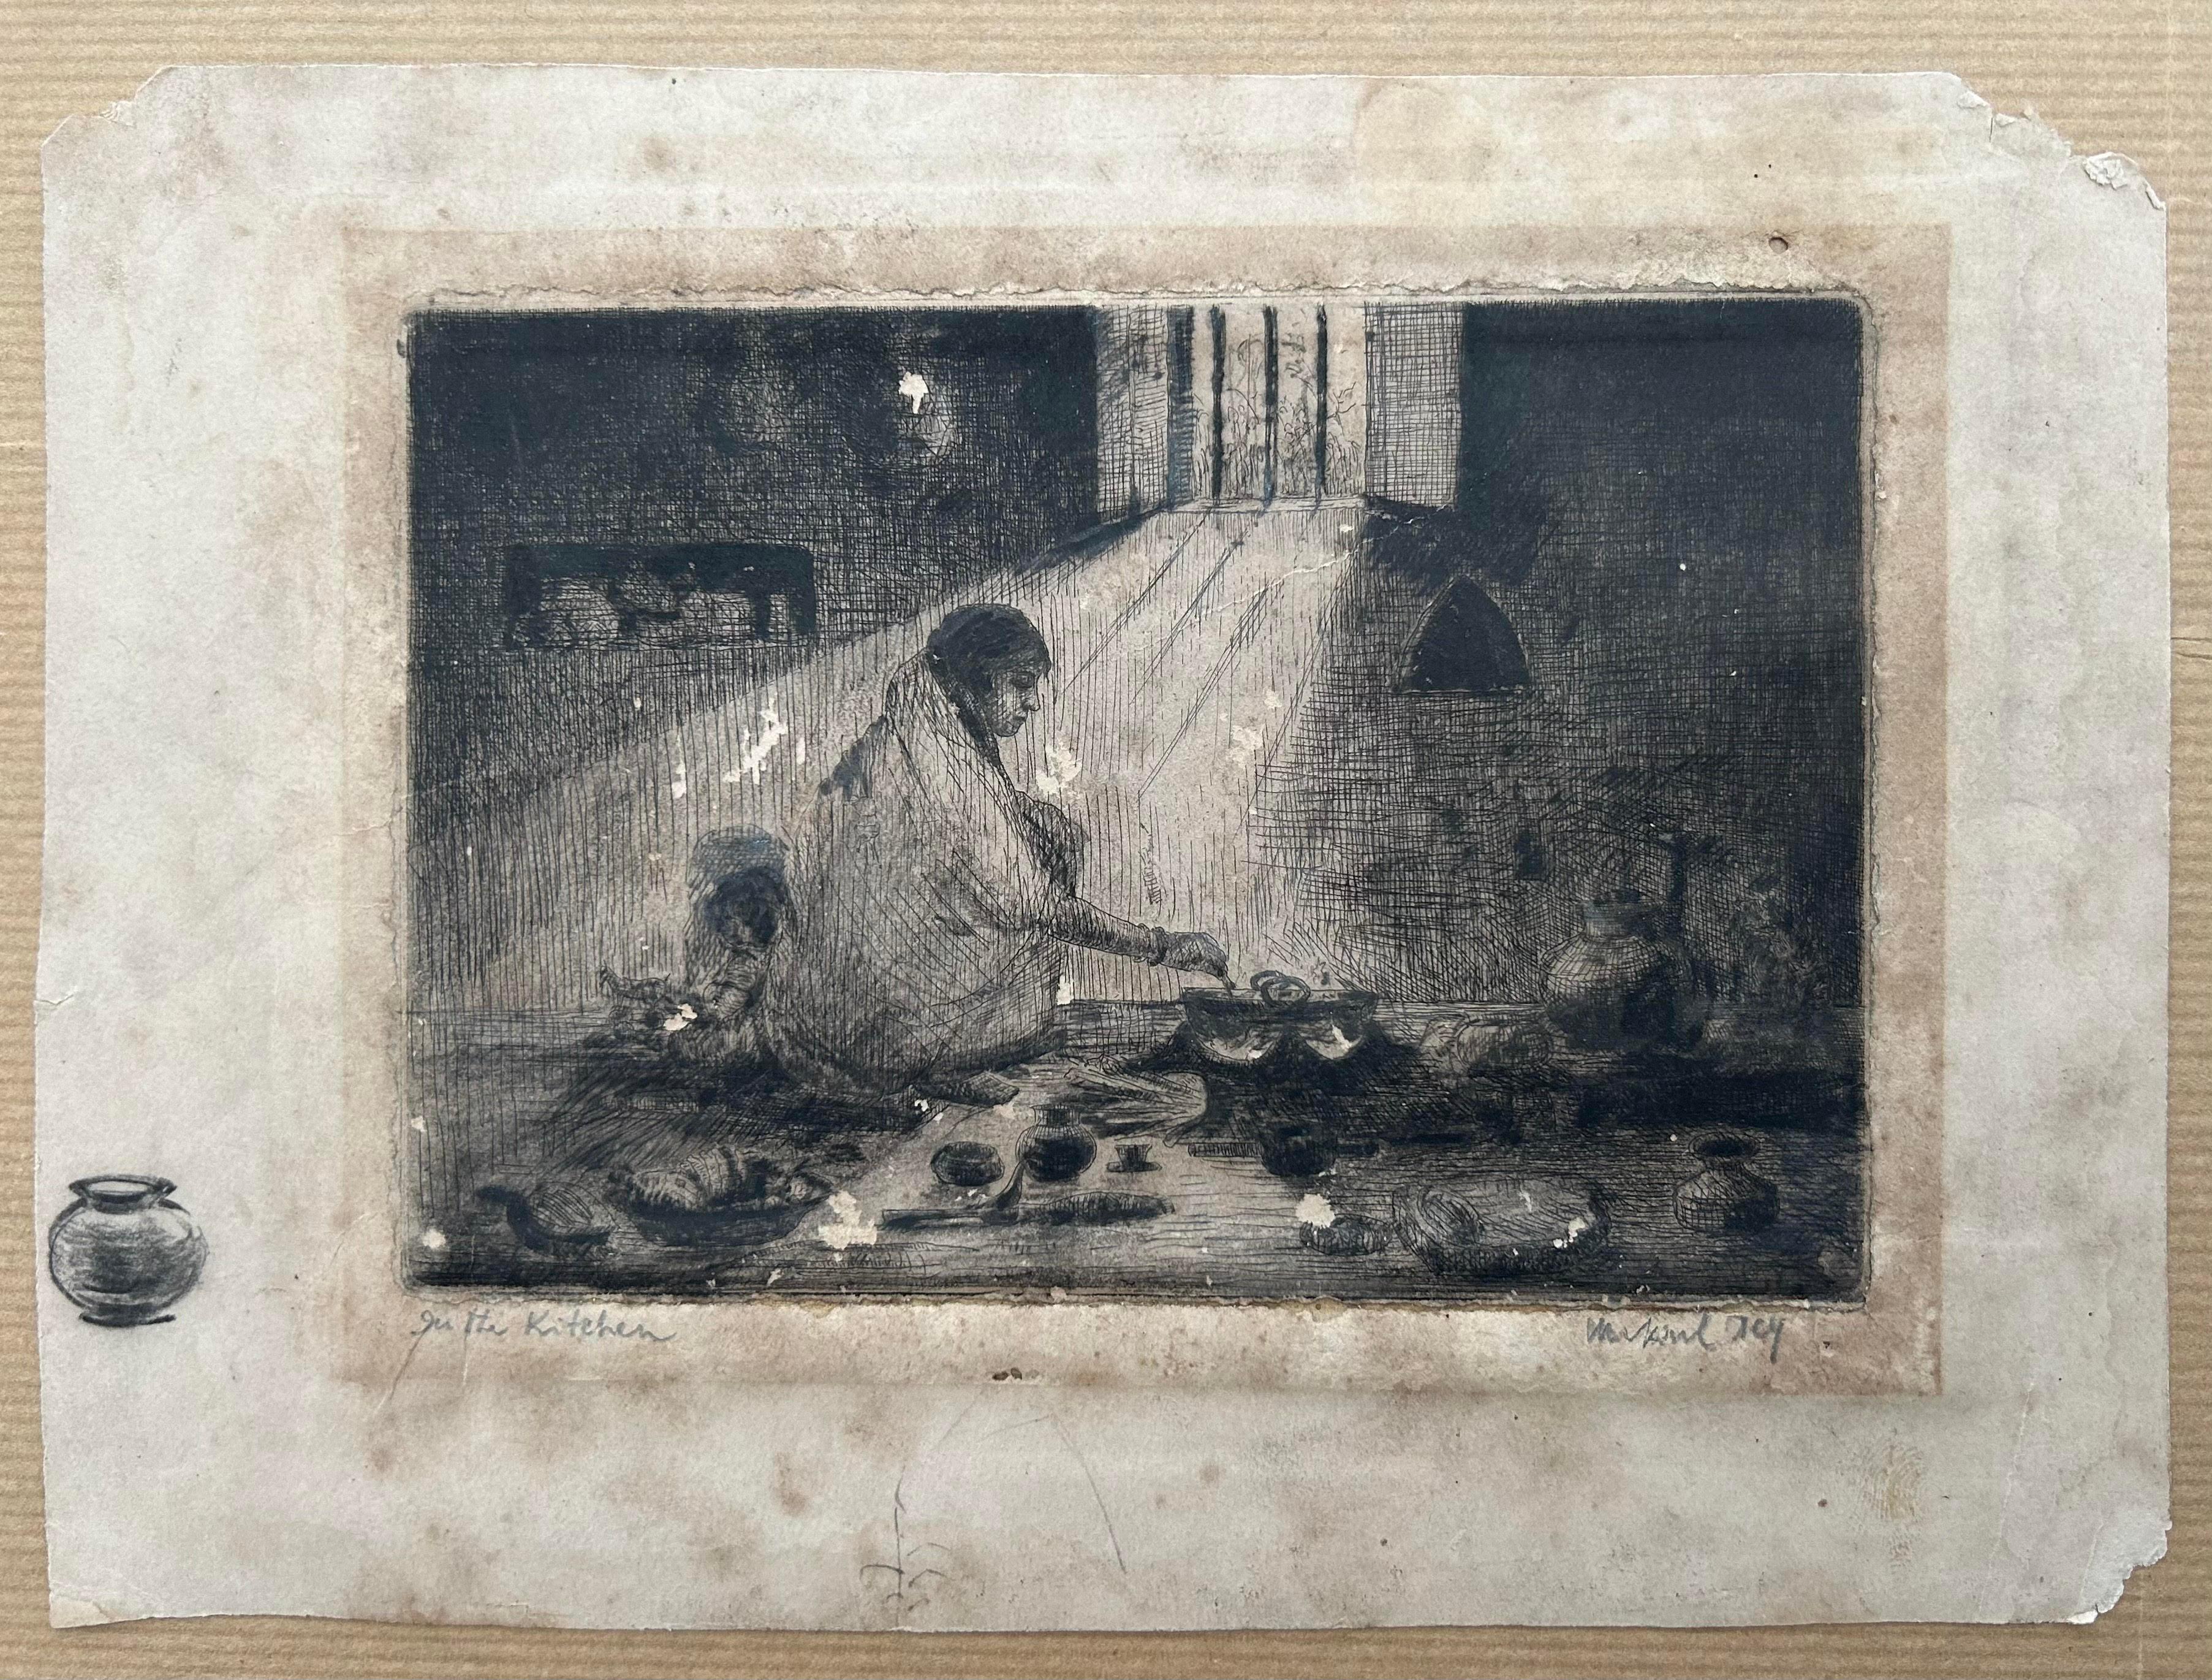 Unknown Landscape Print - Modern Indian Art Mukul Dey Etching Signed and Titled 'In the Kitchen 'Rare 